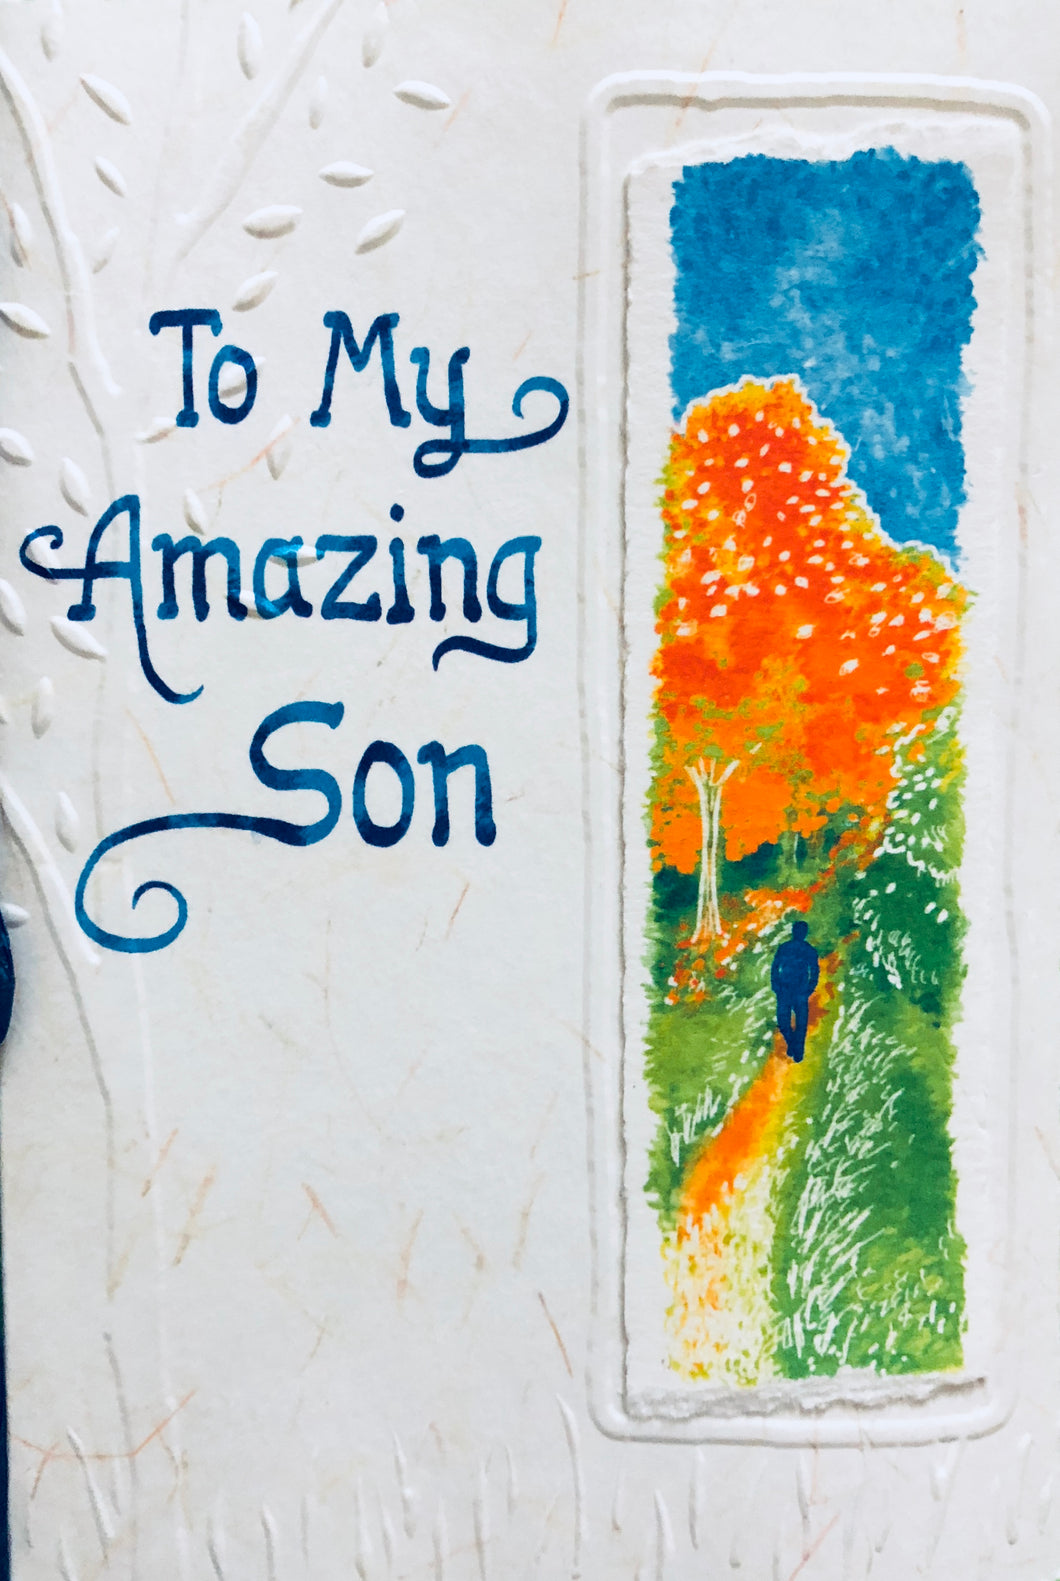 To my amazing son